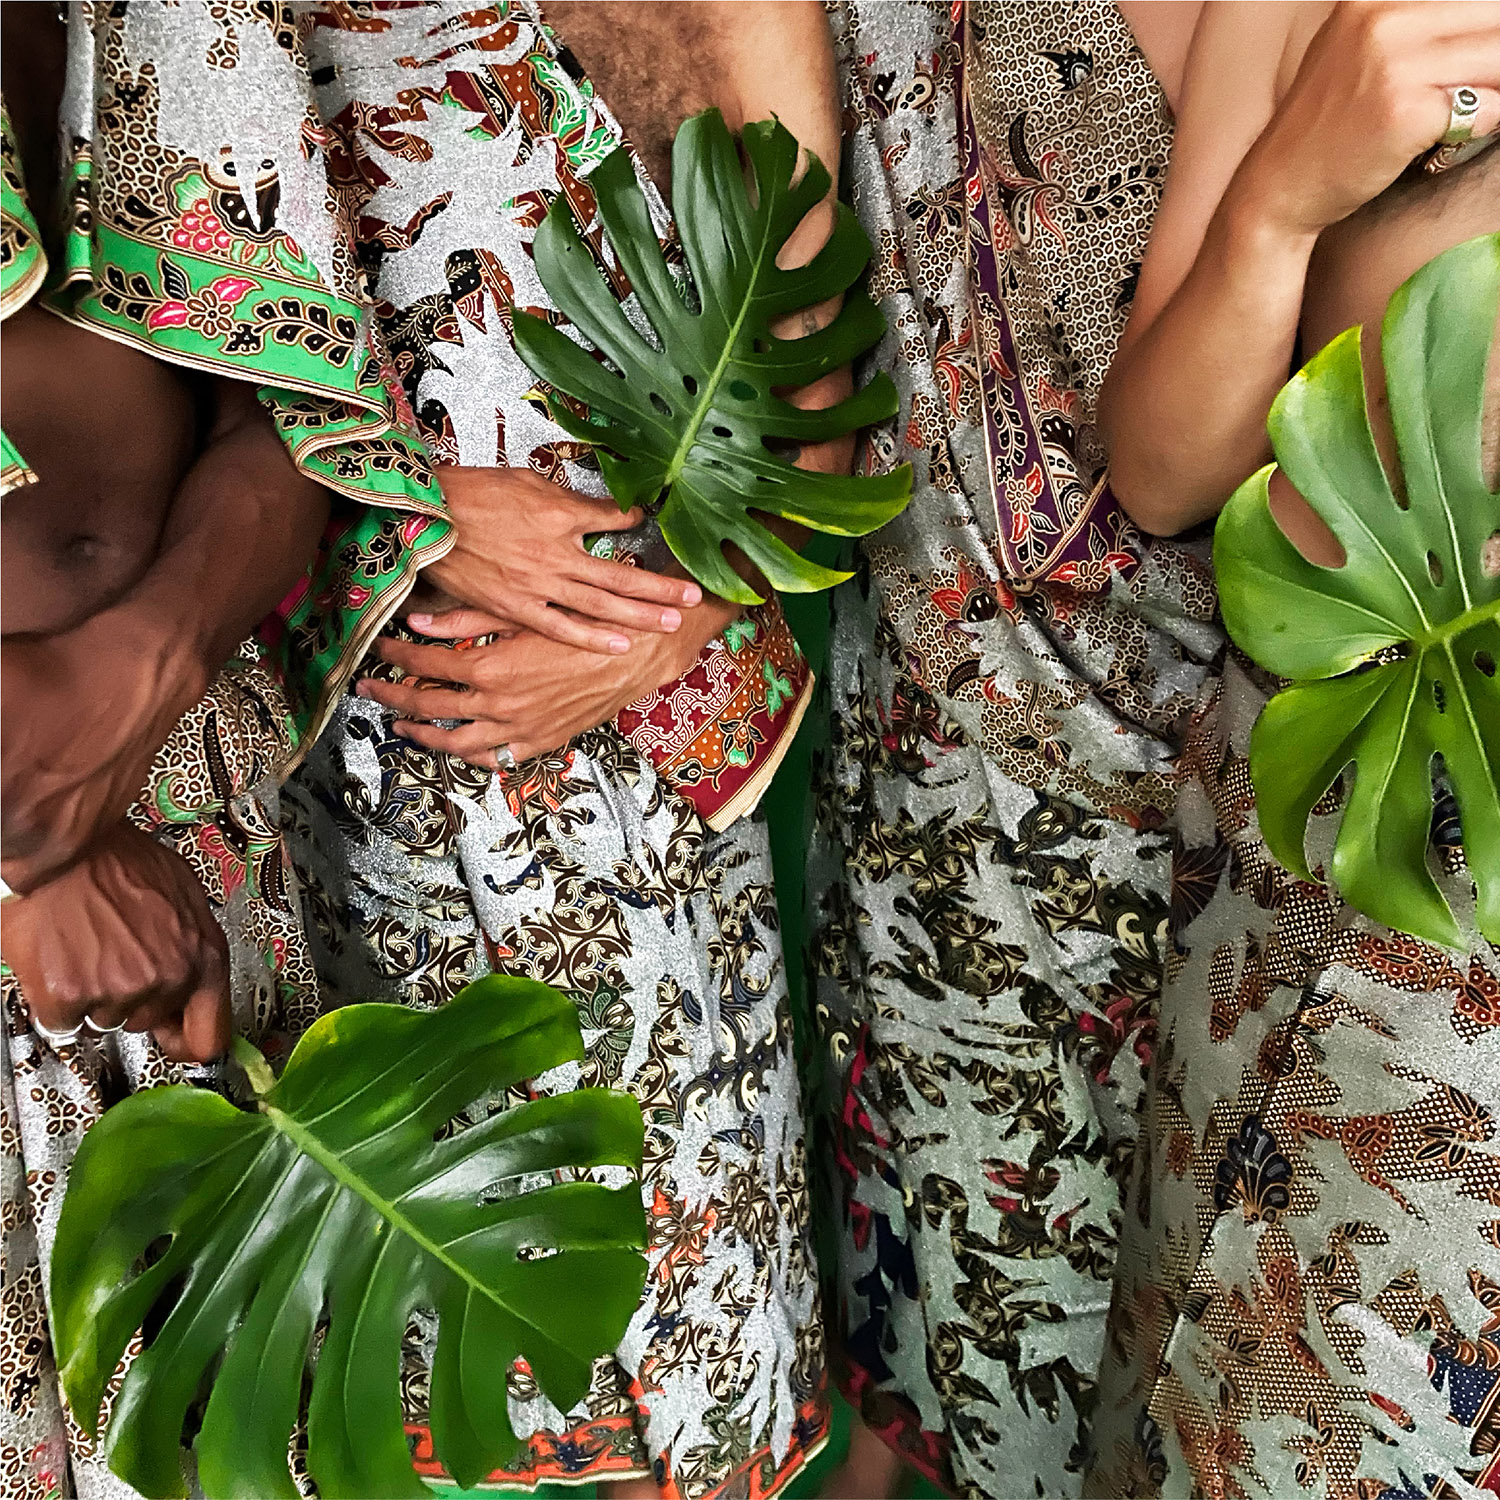 Four bodies draped in a Filipinx sarong pattern designed by Chris Fussner and Zeus Bascon of Tropical Futures Institute. Three of the people are holding large monstera leaves.